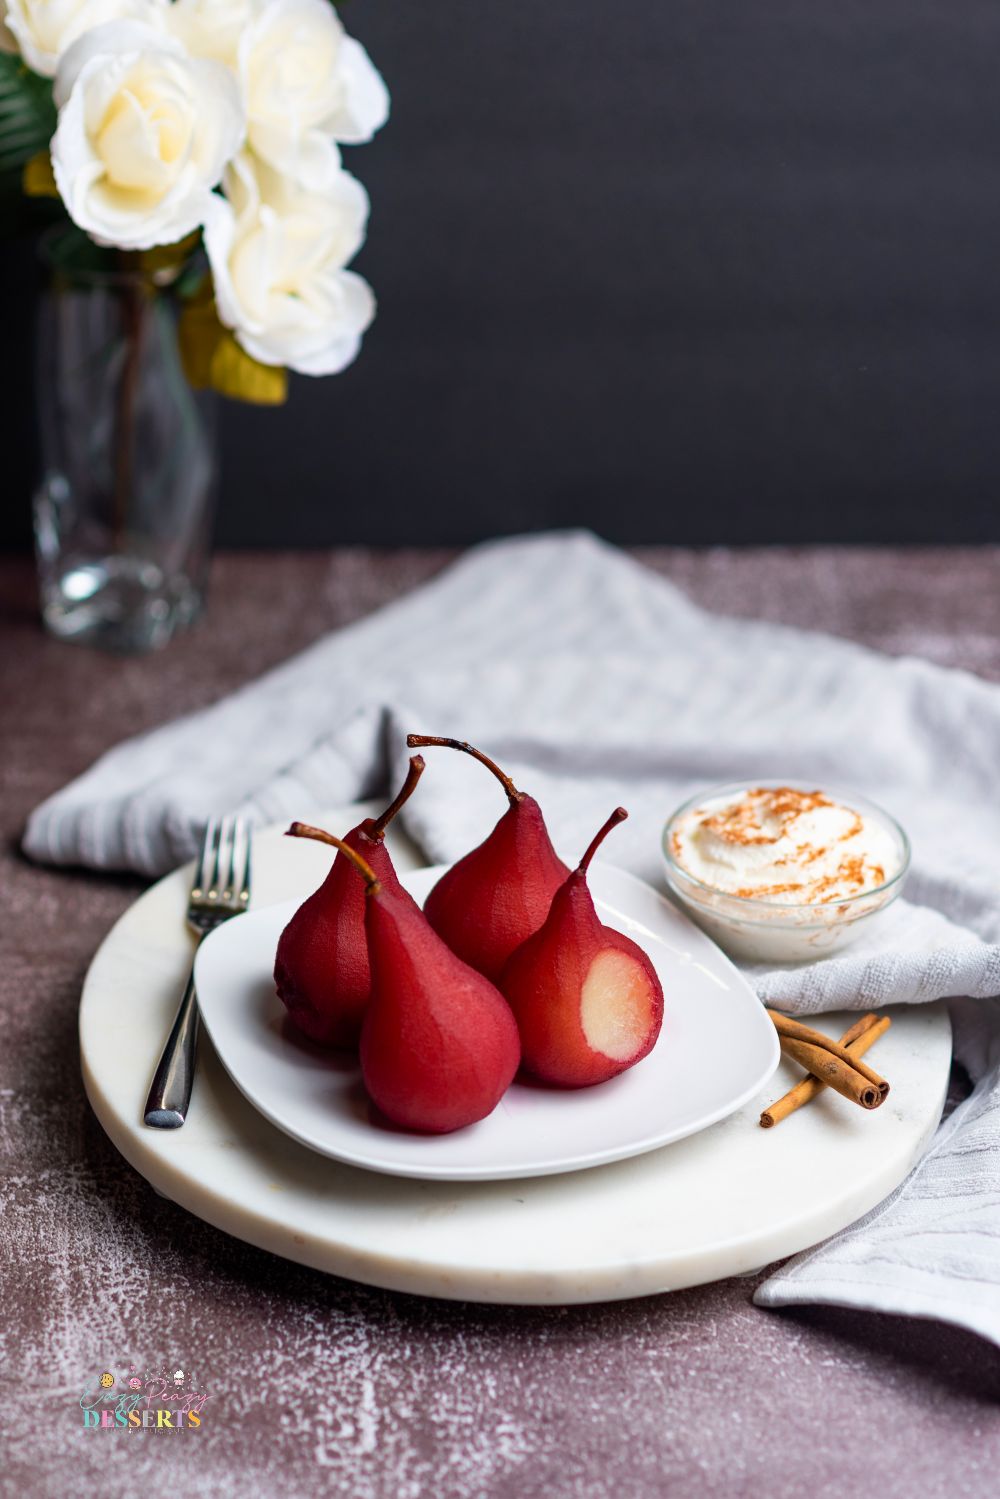 Poached pears in red wine of a white serving plate